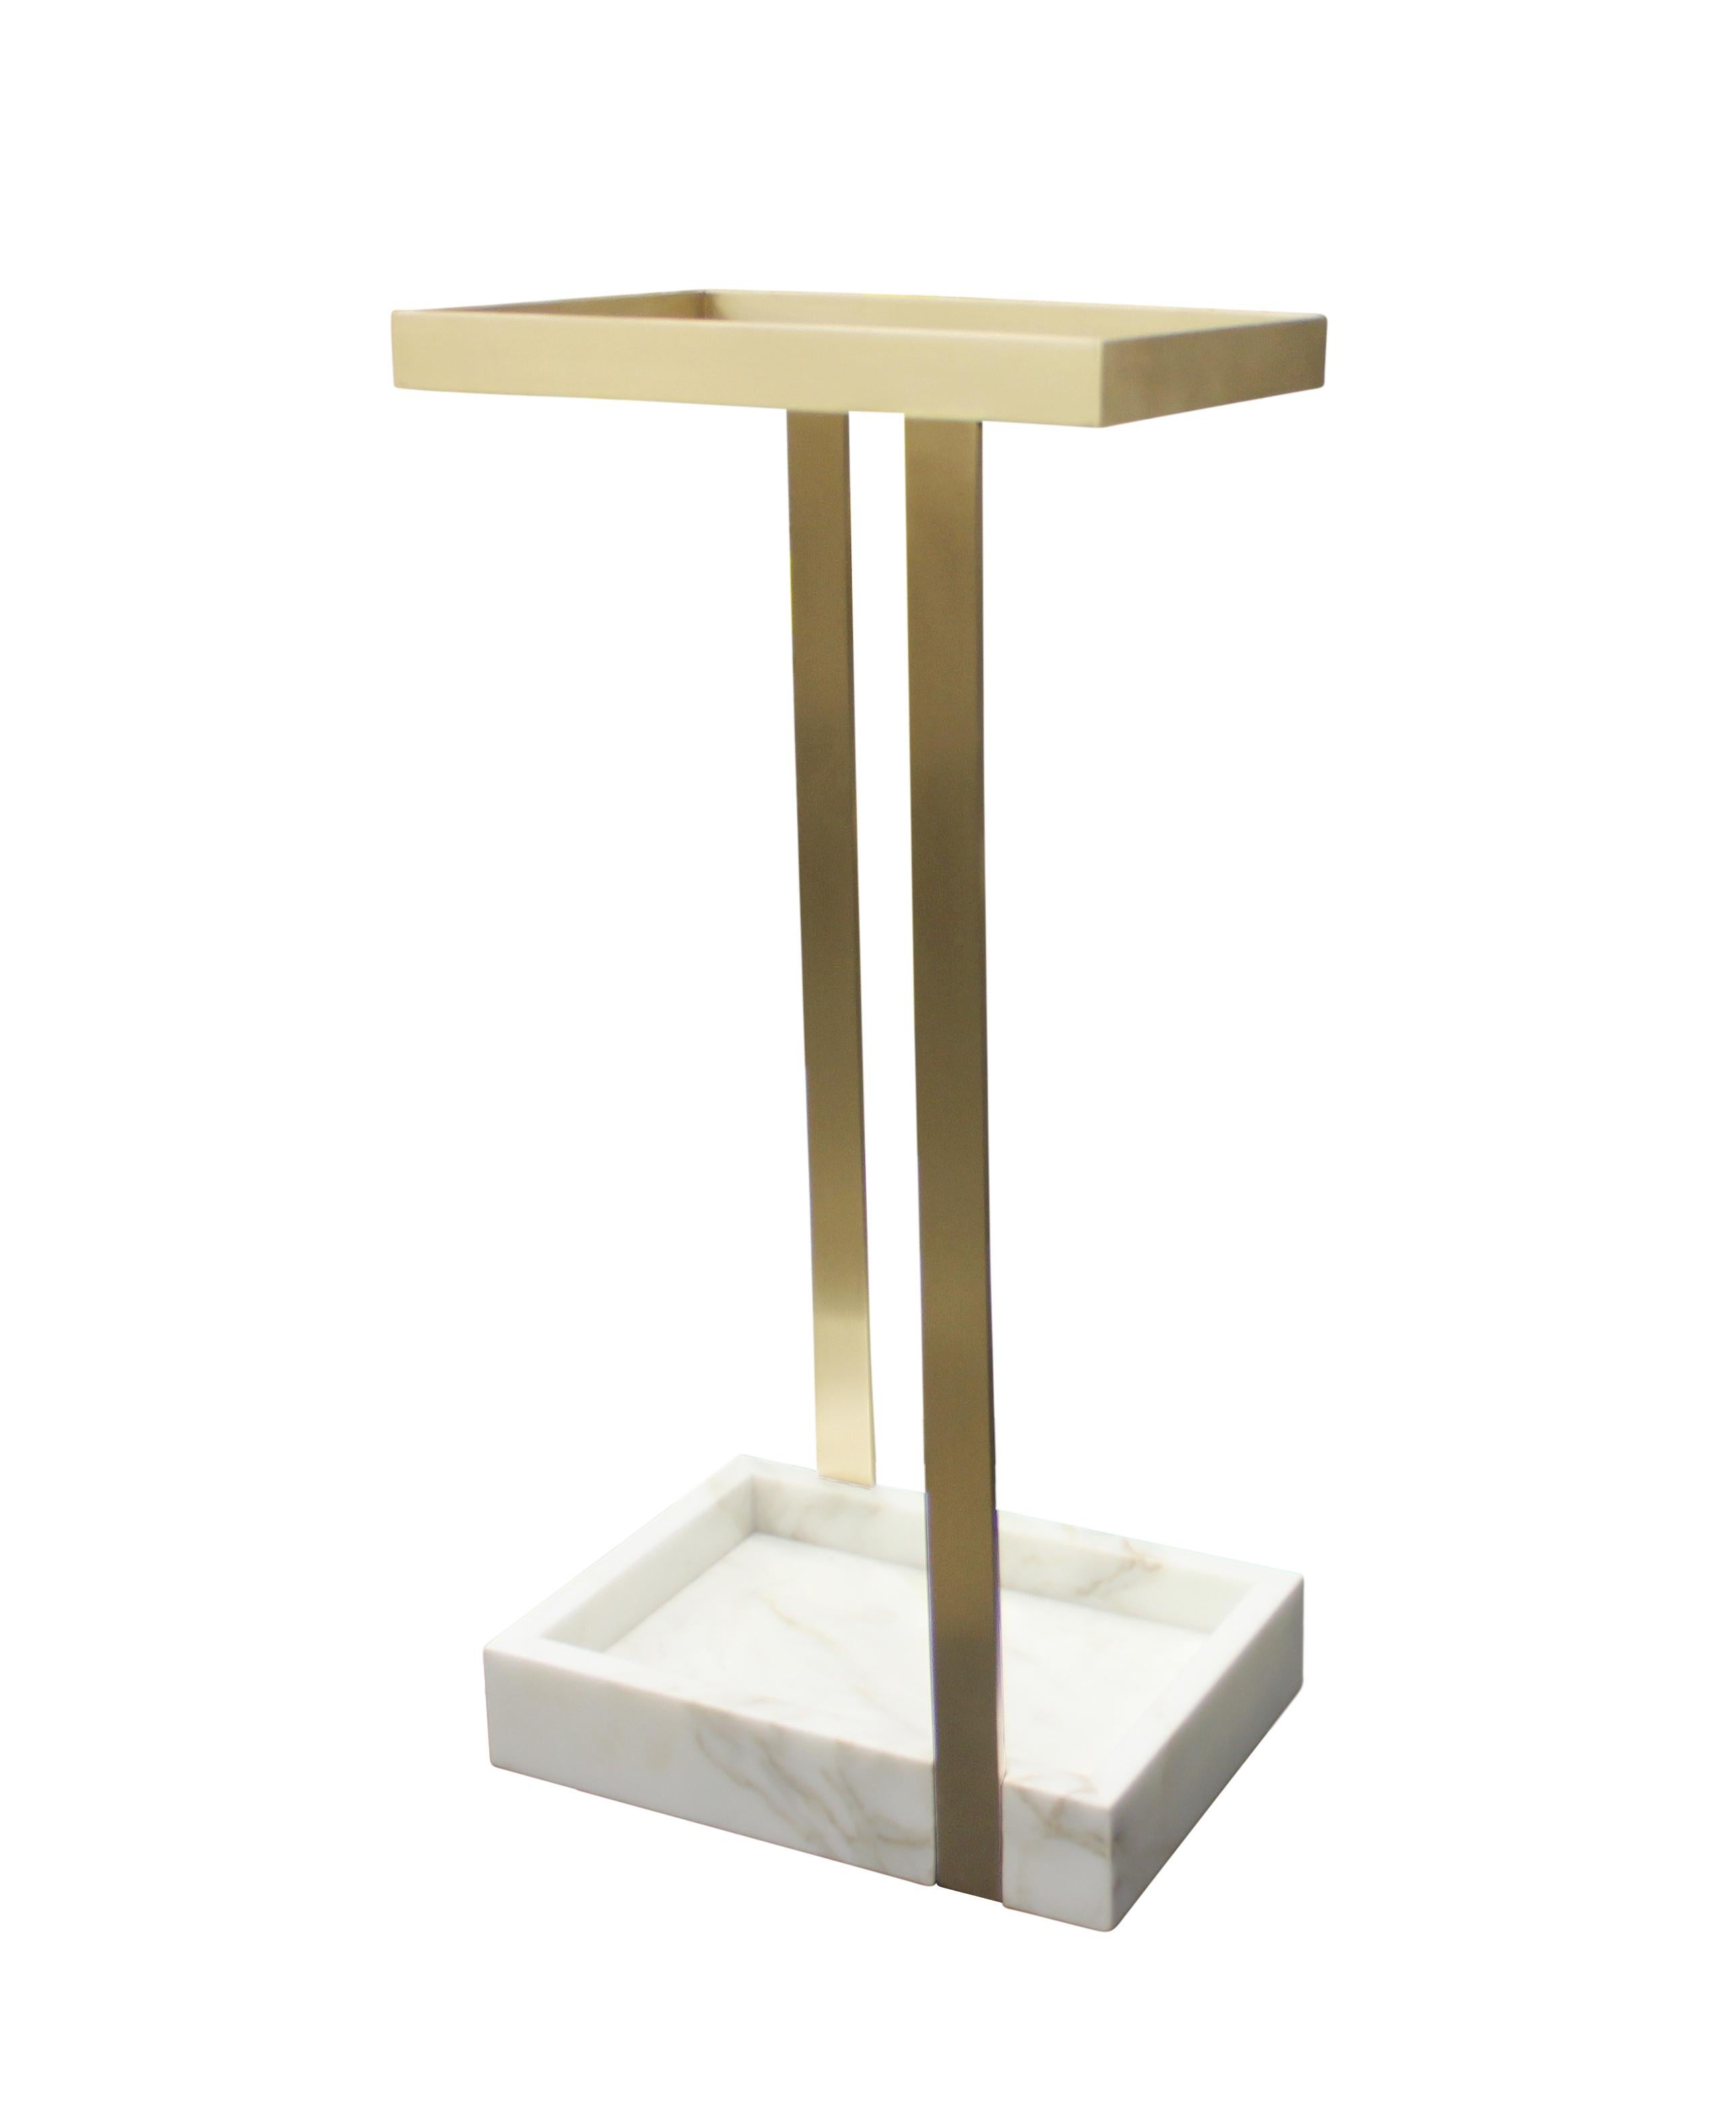 This subtle yet striking umbrella stand creates an arresting focal point in a foyer or vestibule. Shown here in satin bronze with calacatta gold marble, the piece is handmade to order in New York City and can be specified in any number of custom